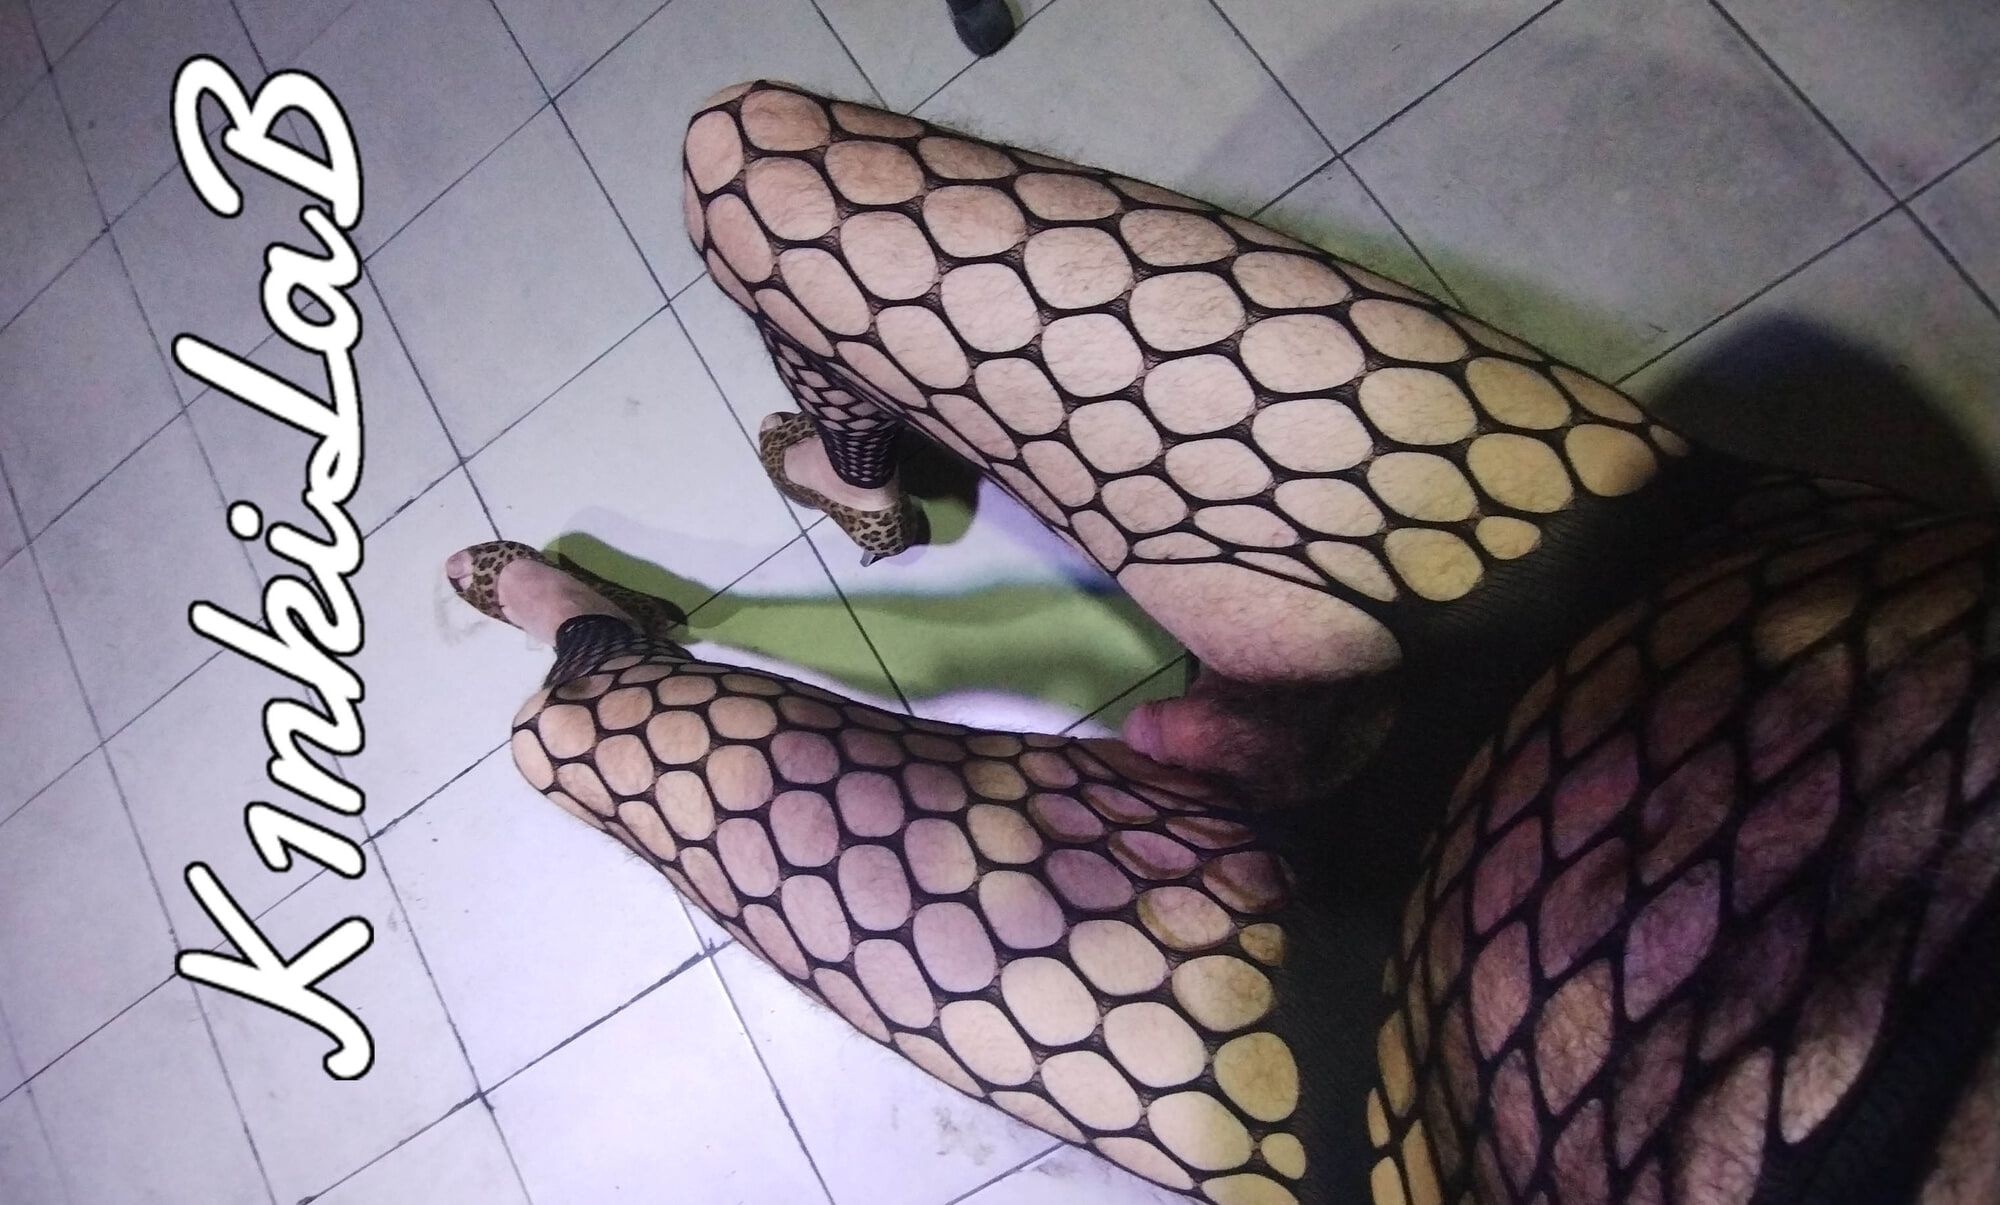 Punished with fishnet stockings and leopard heels #6